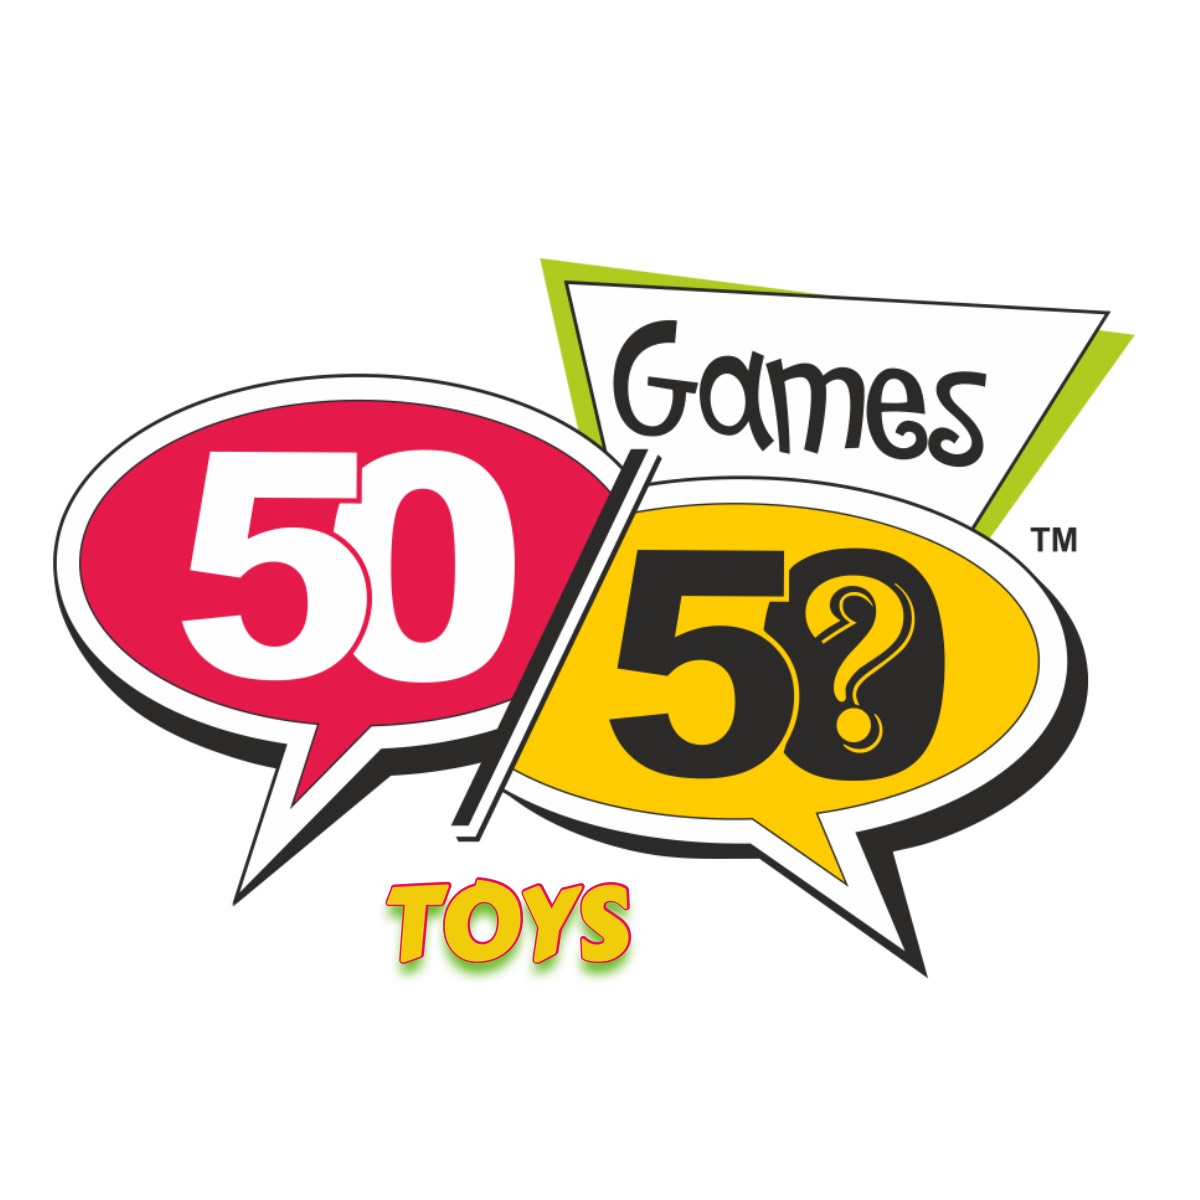 50/50 Games & Toys